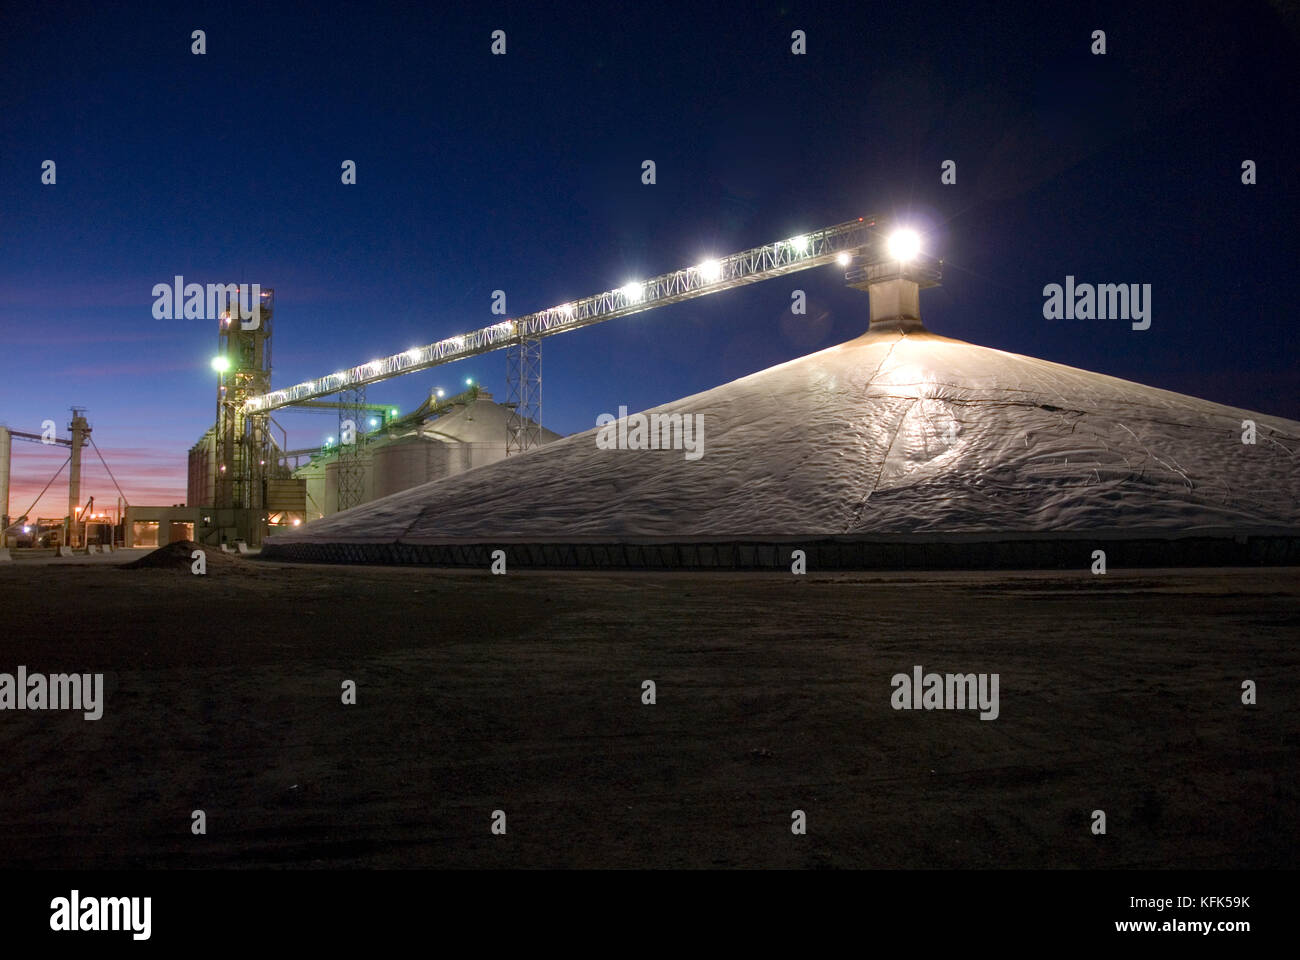 A NIGHT VIEW OF A NEW TYPE OF TEMPORARY GRAIN ELEVATOR MADE OF PLASTIC TARPS HOLDS 2 MILLION BUSHELS OF CORN Stock Photo